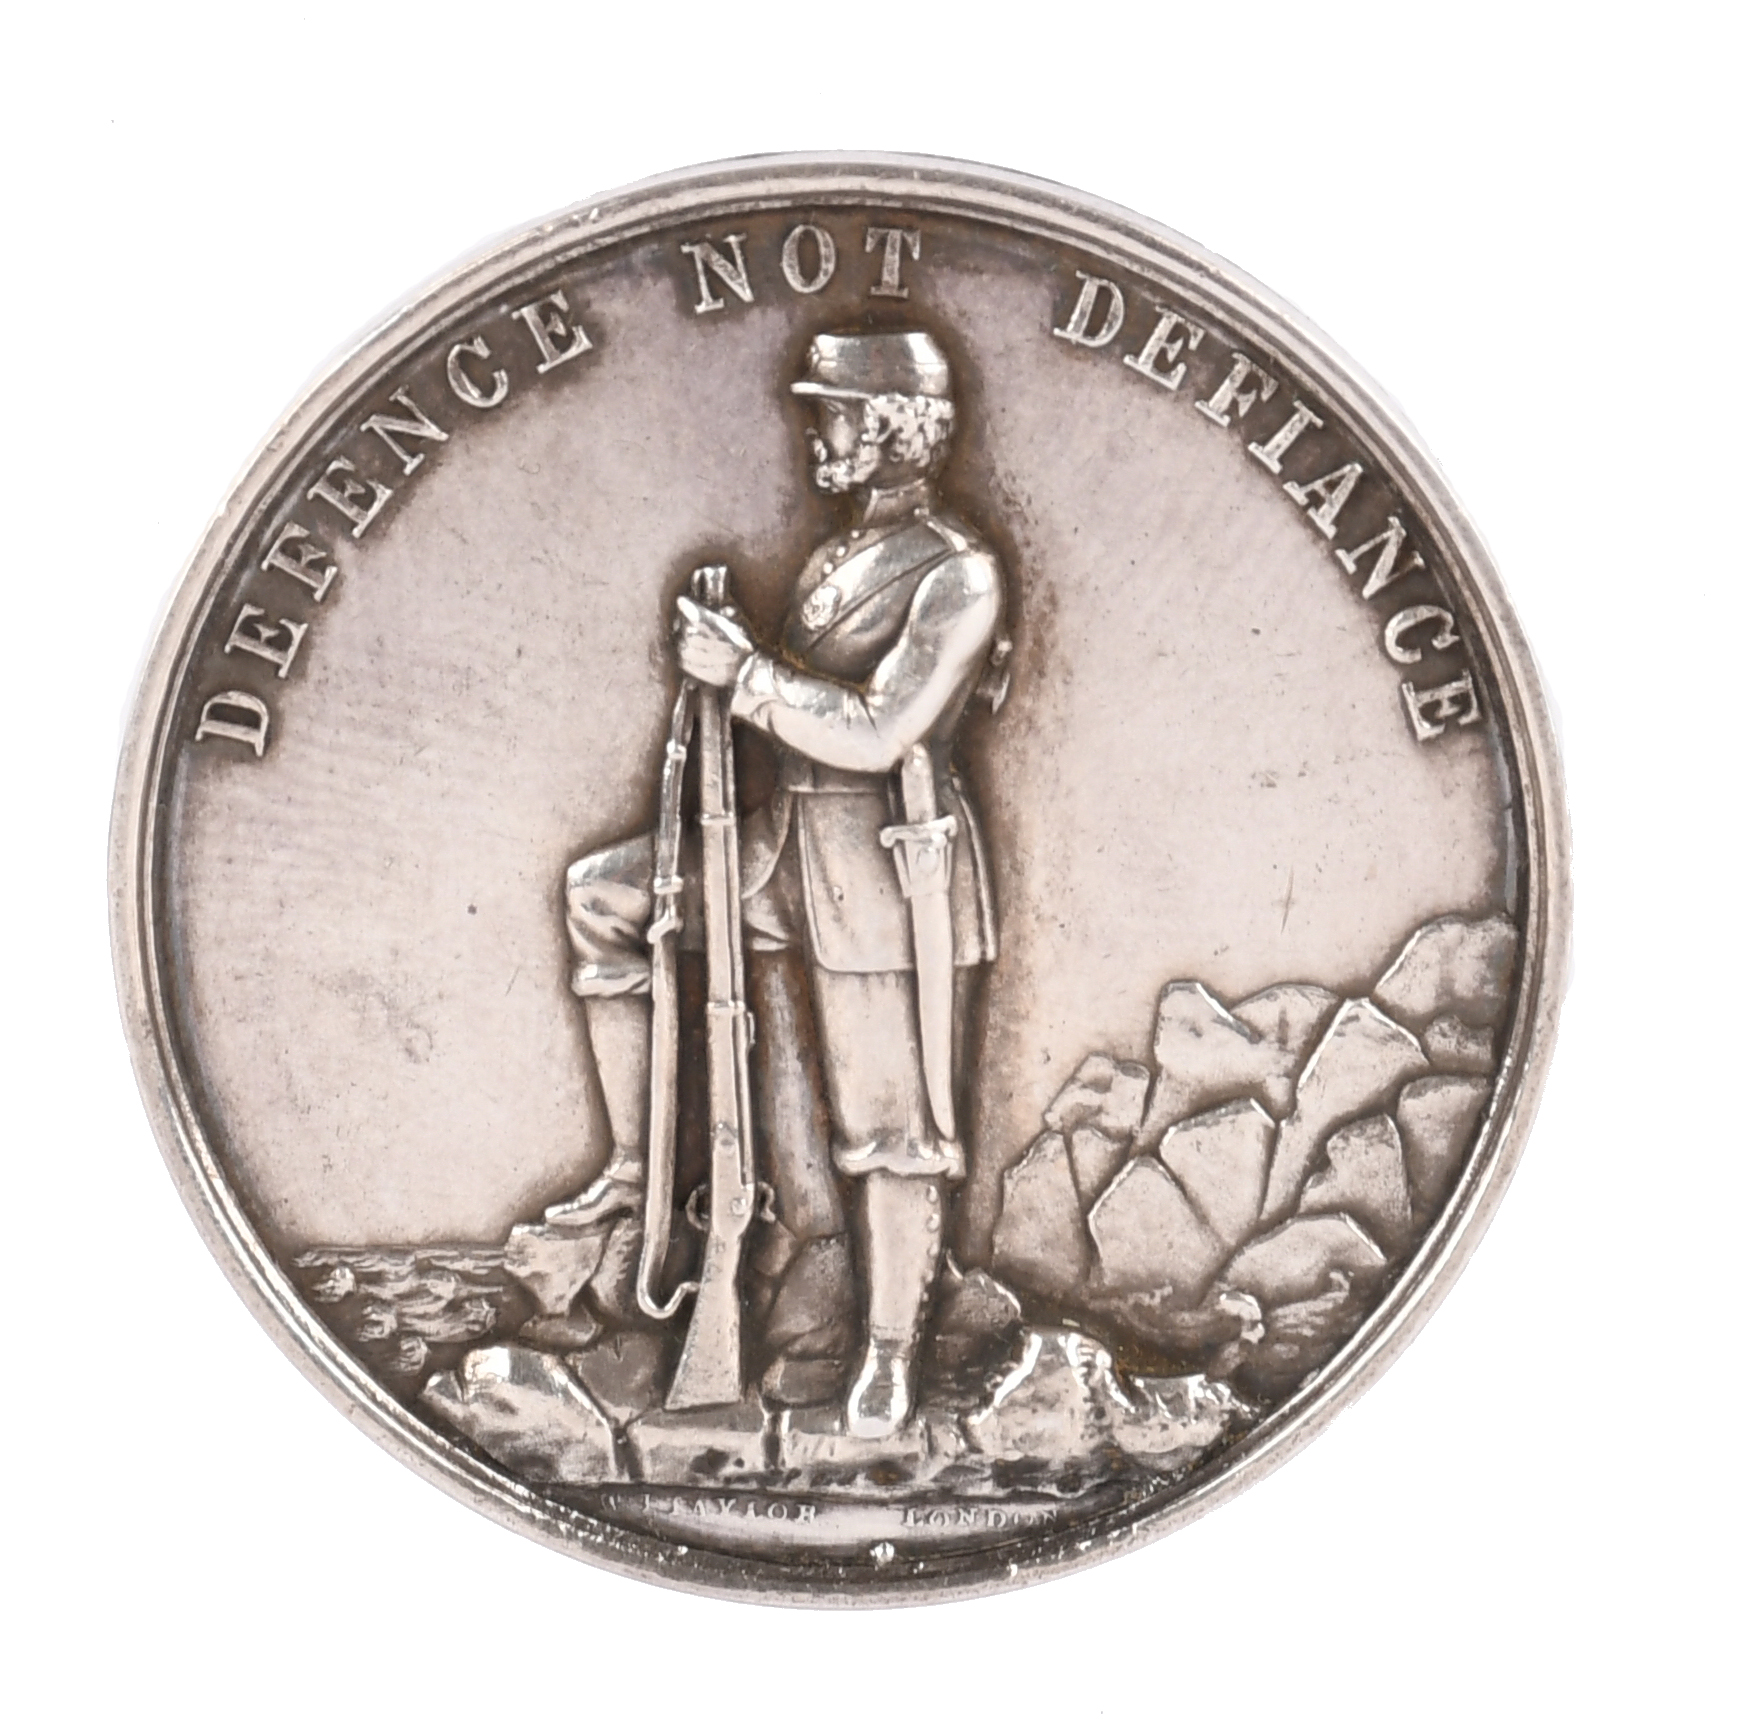 The London Rifle Brigade: a silver prize medal to 33 mm, a Victorian Rifle Volunteer standing